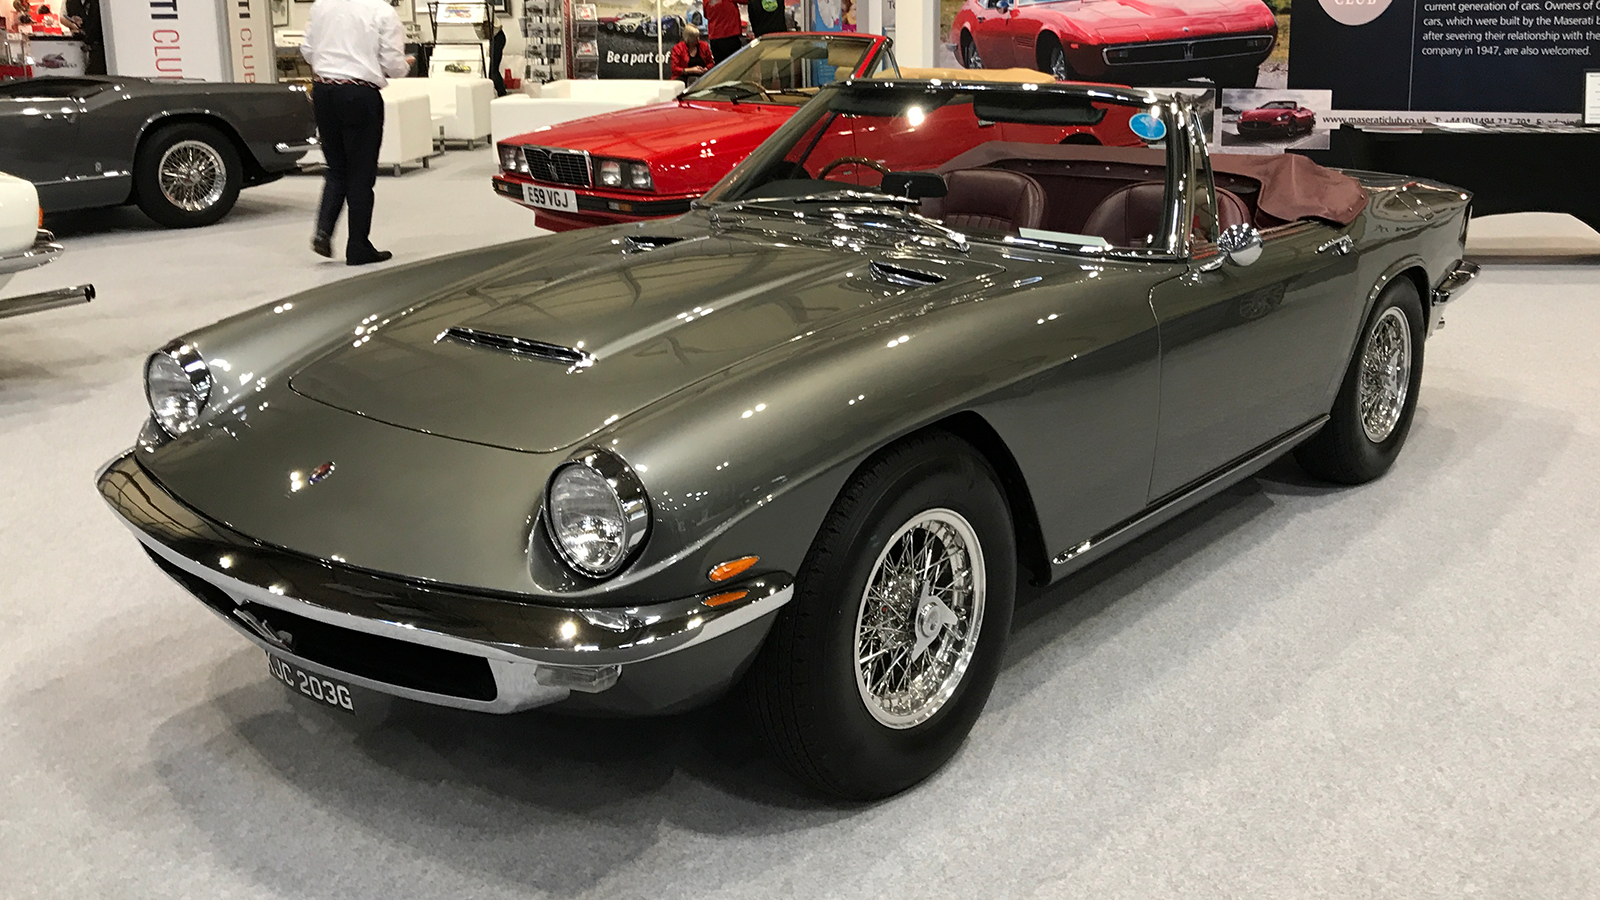 Our 18 favourite cars from the NEC Classic Motor Show 2019